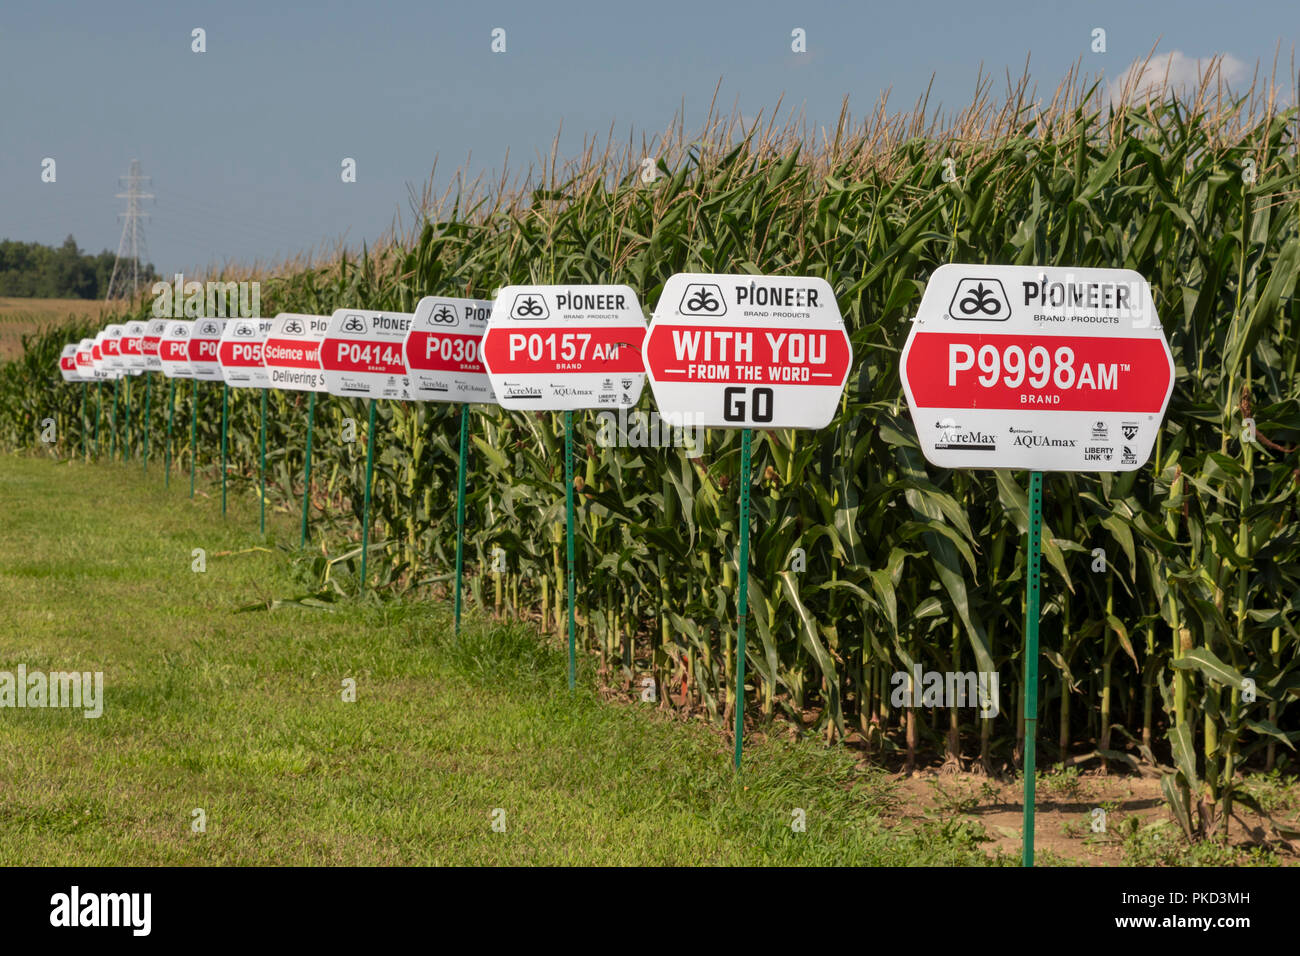 Galien, Michigan - Varieties of corn growing from seeds produced by Pioneer, a DuPont company. Nearly all corn grown in the United States is genetical Stock Photo